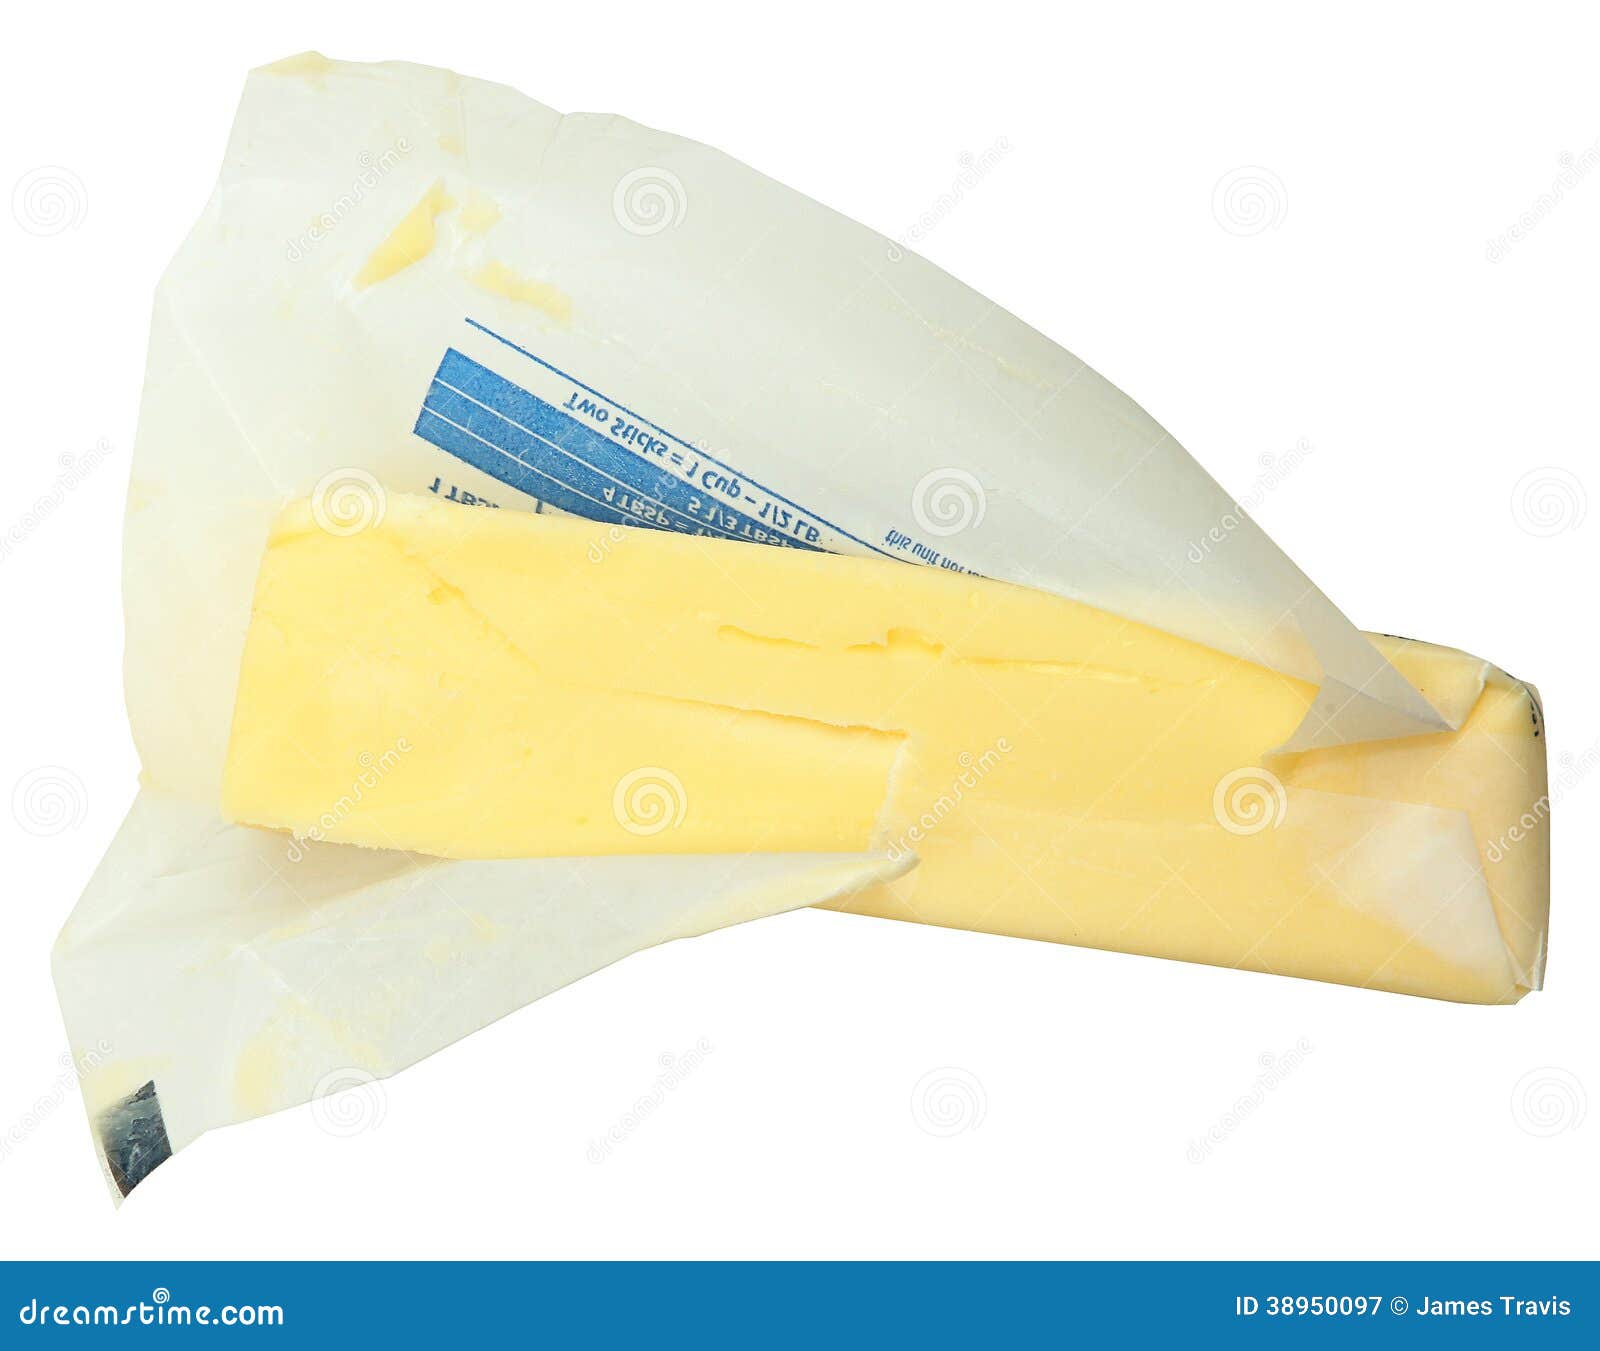 stick of butter in paper unwrapped over white